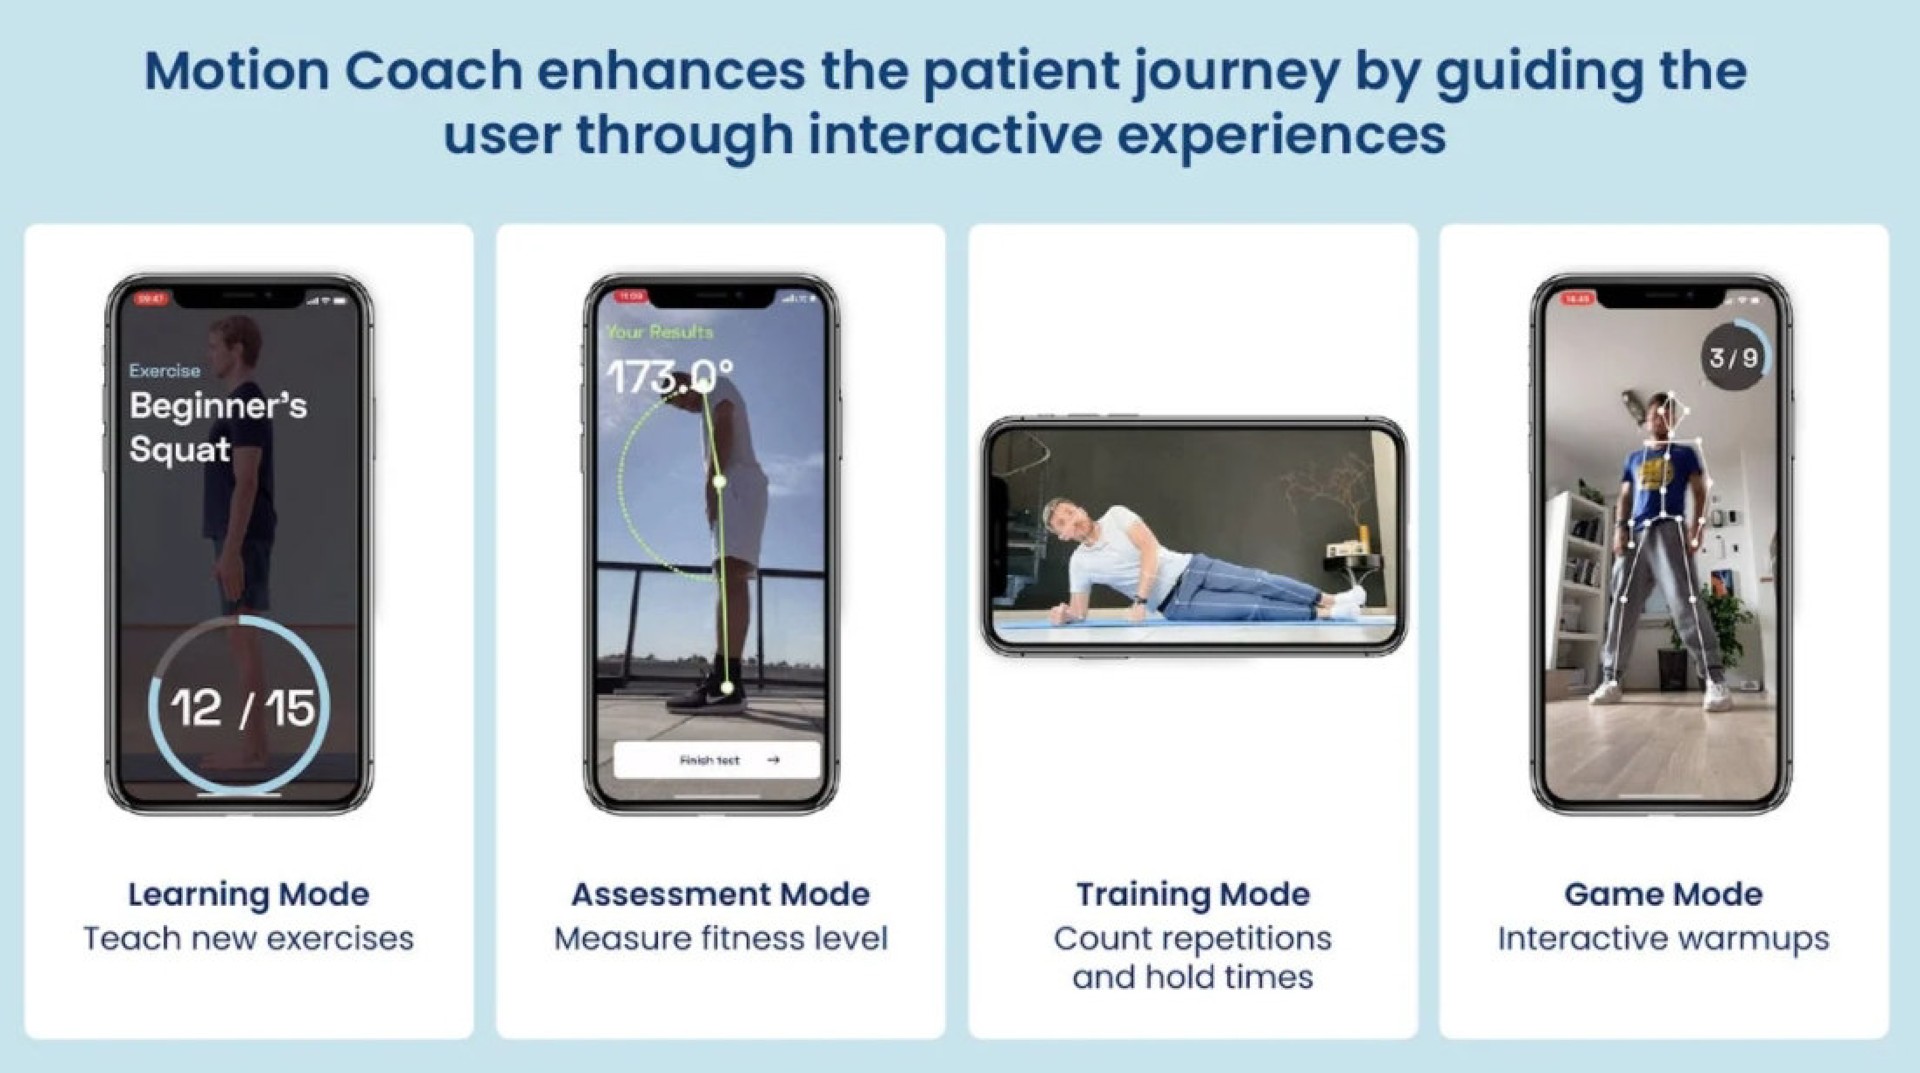 motion coach enhances the patient journey by guiding the user through interactive experiences | Kaia Health